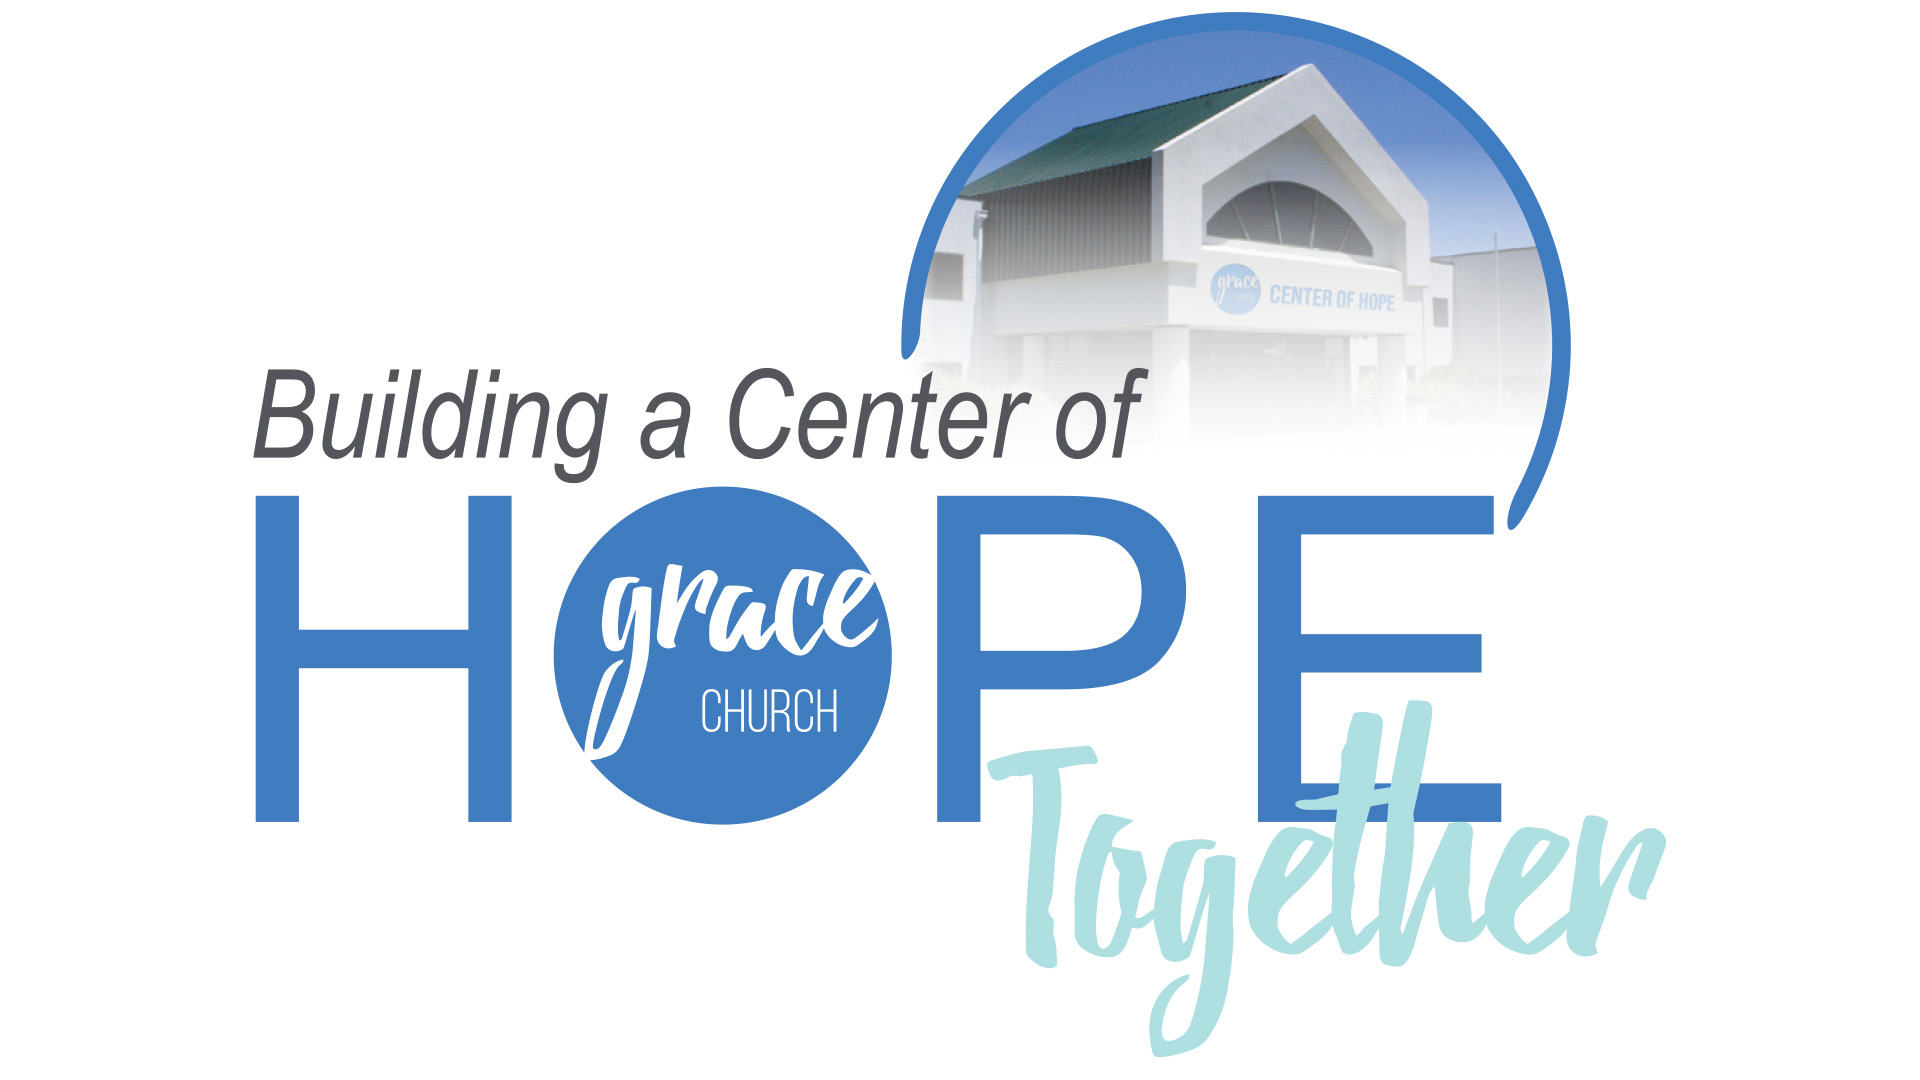 Center of Hope 

Building Campaign
